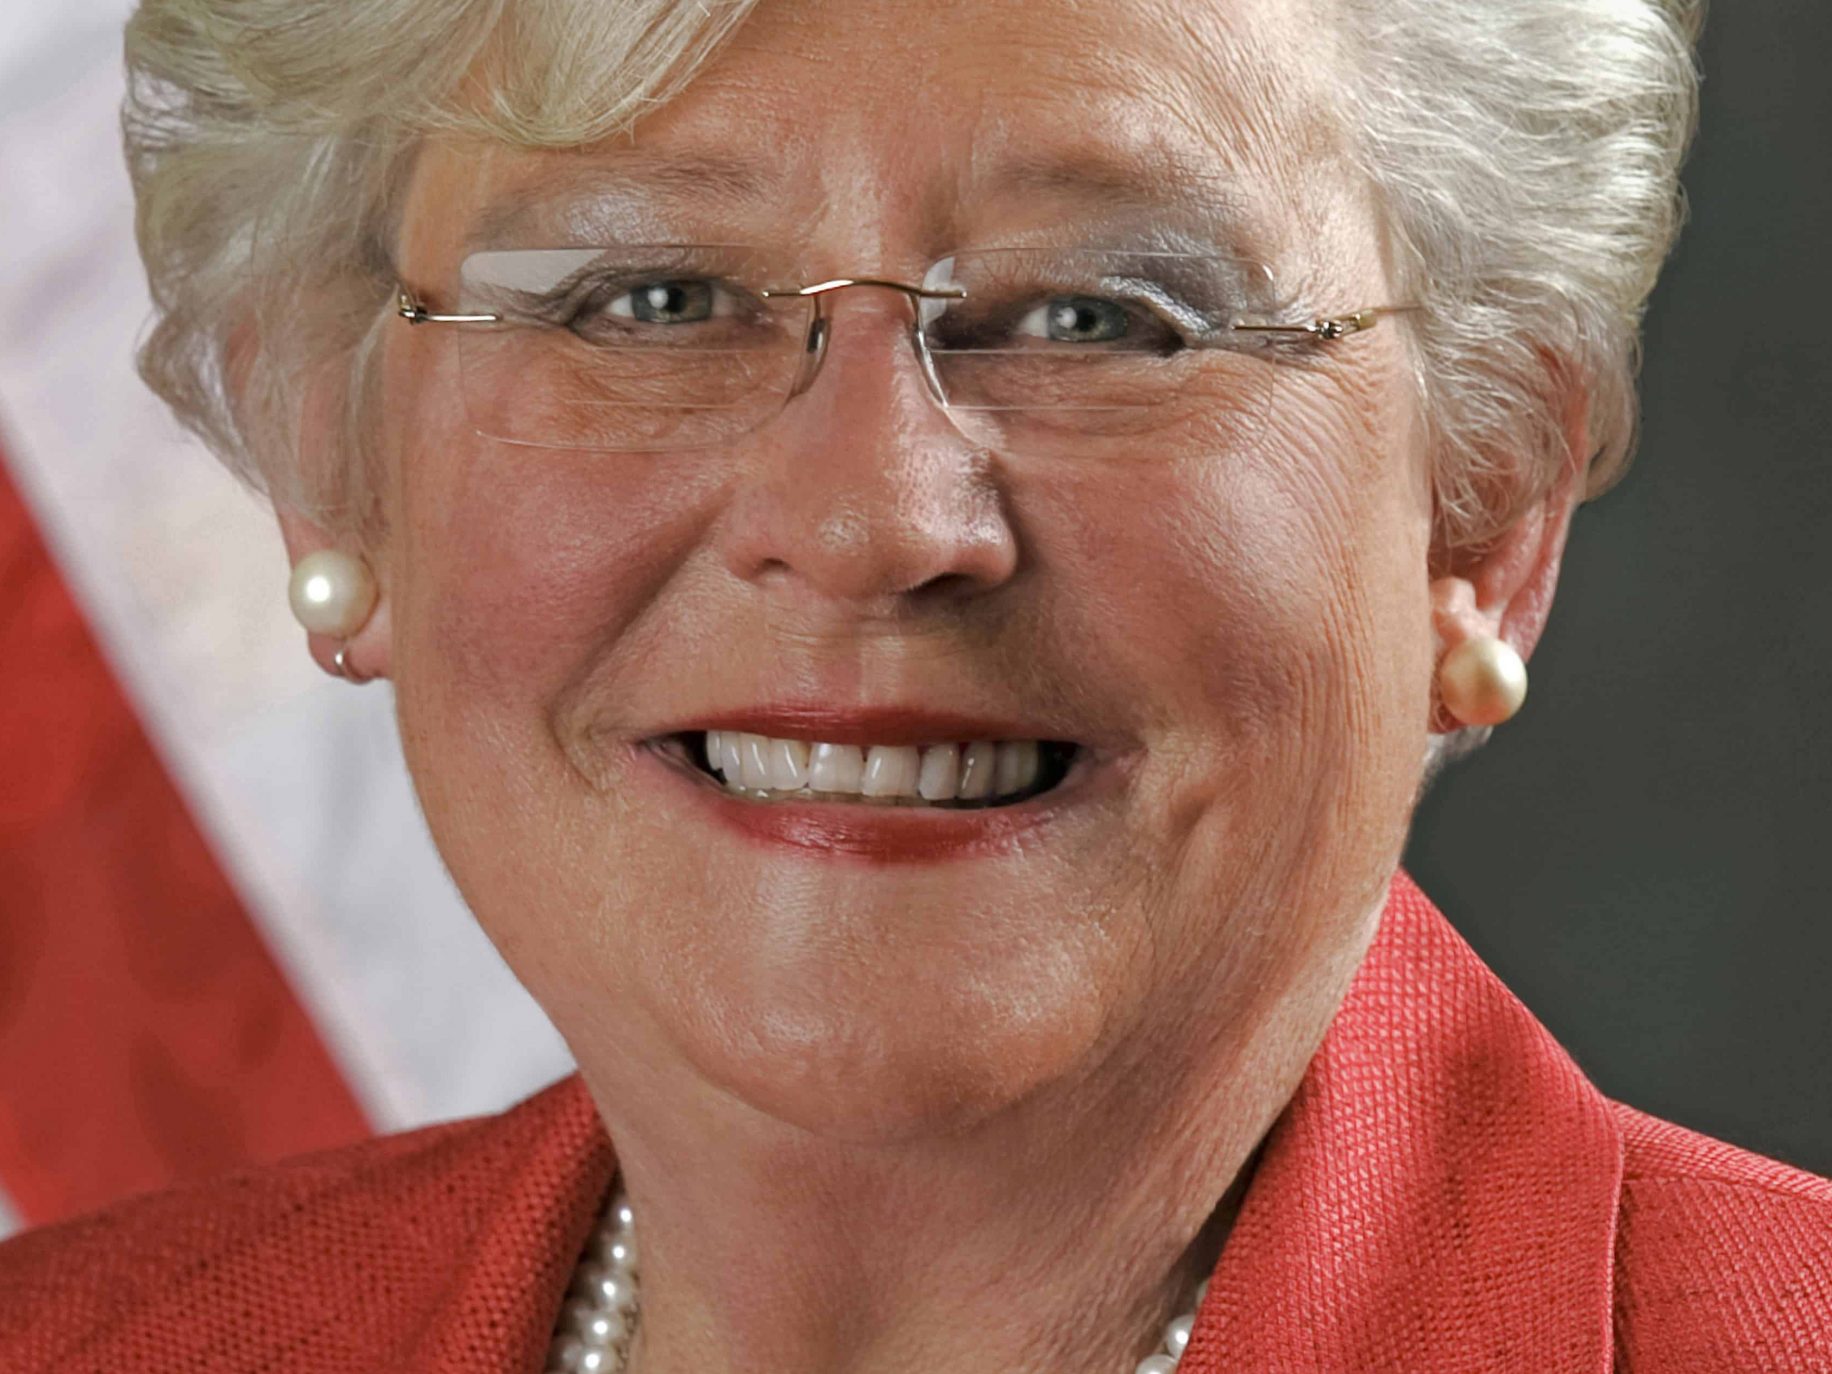 kay-ivey-diagnosed-with-lung-cancer-bama-politics